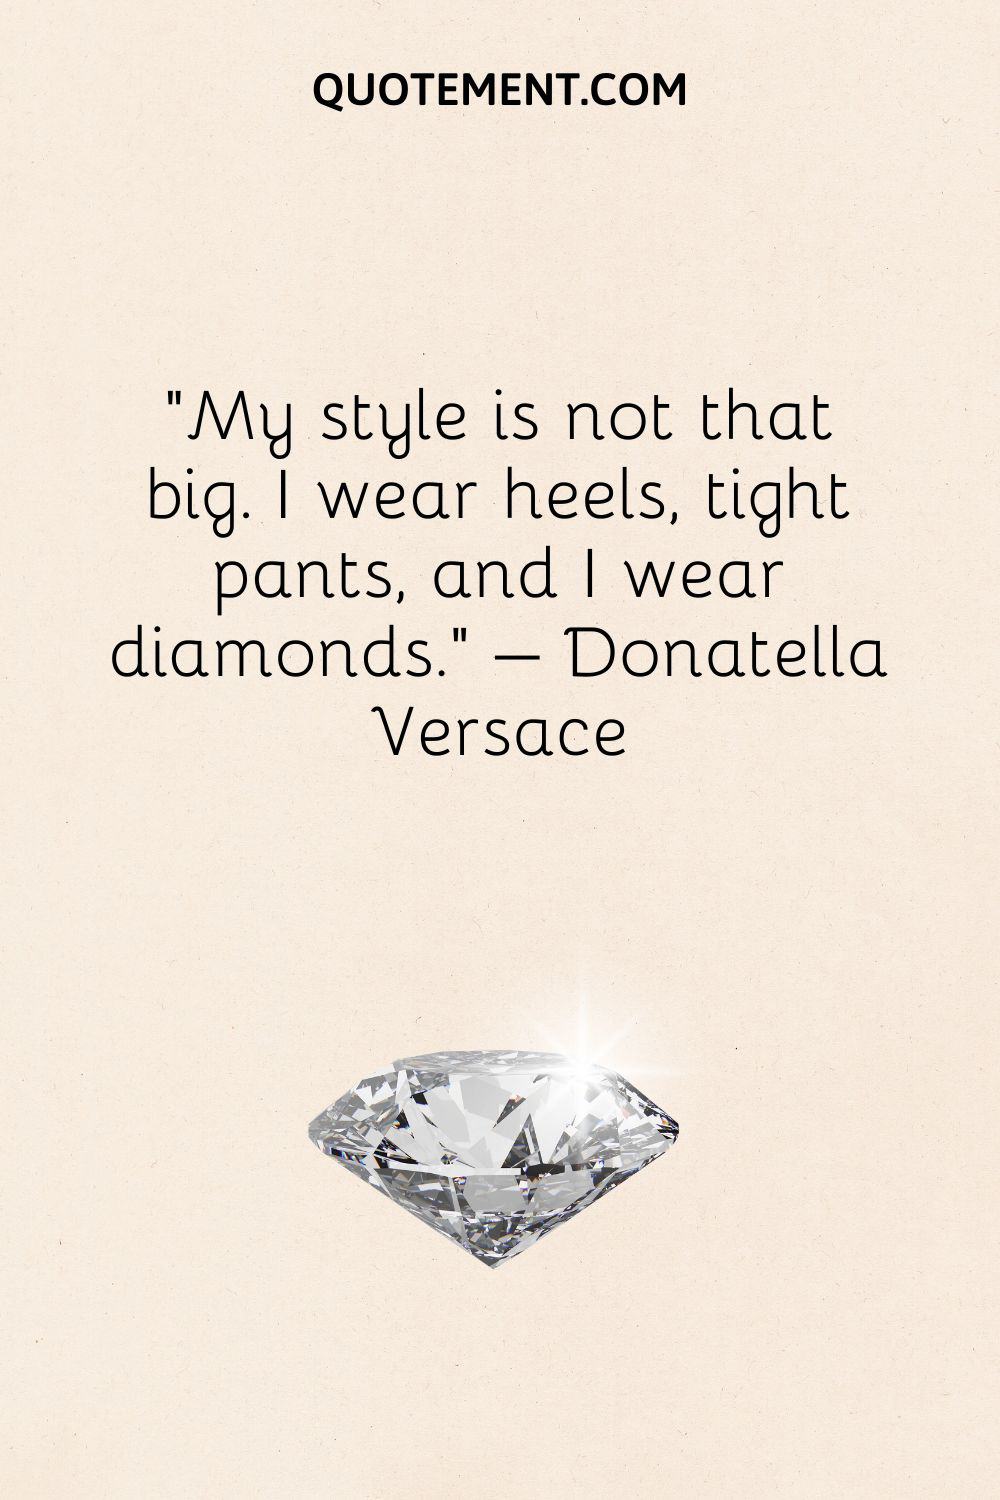 My style is not that big. I wear heels, tight pants, and I wear diamonds.